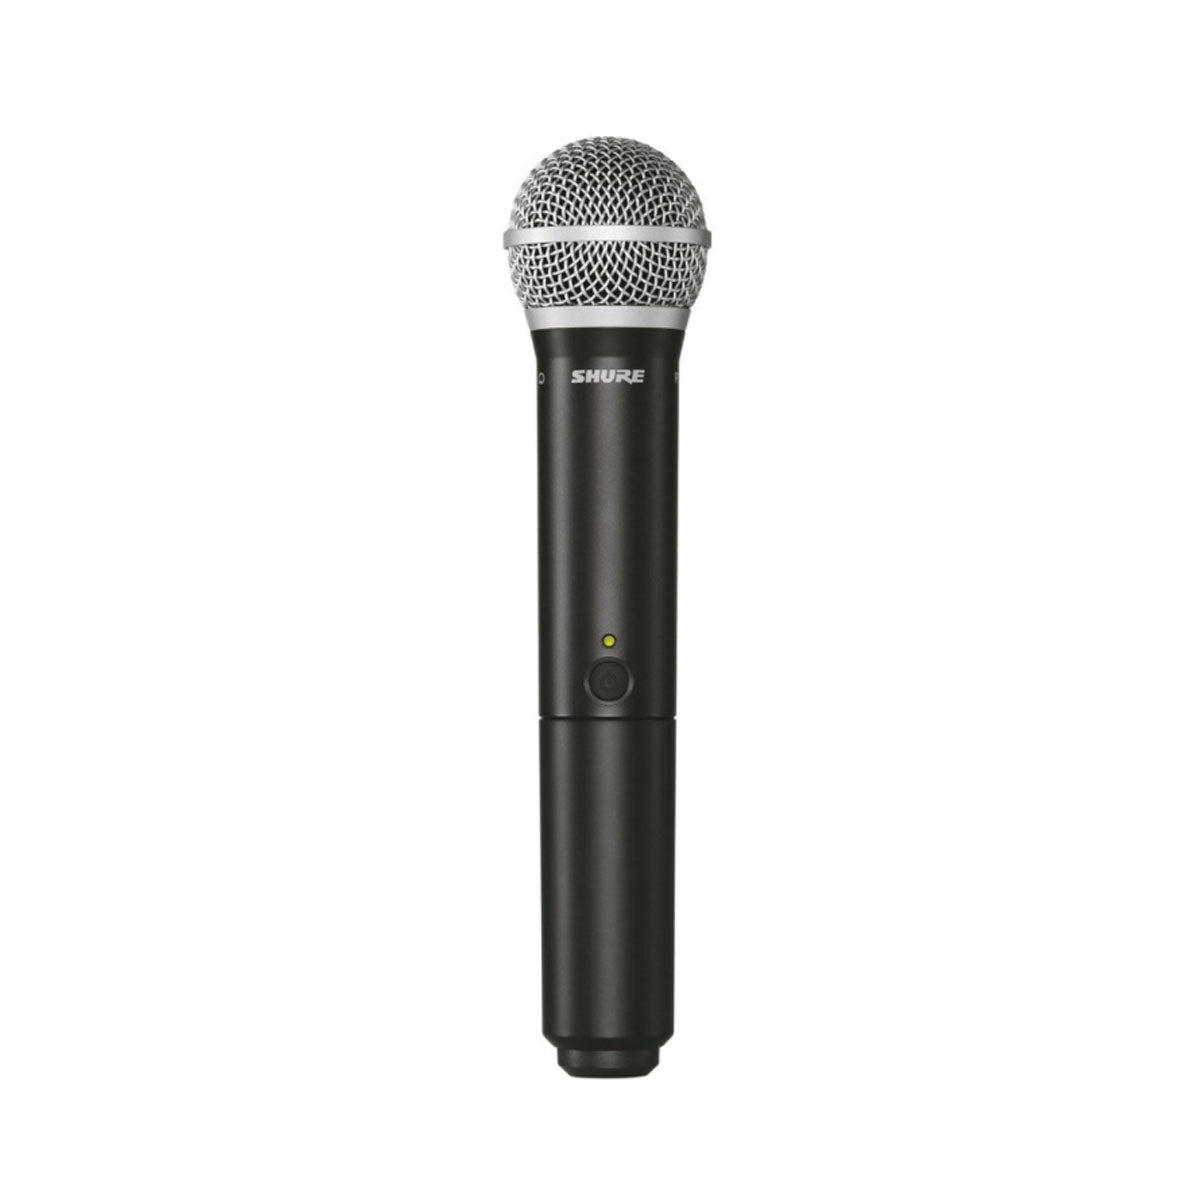 Shure BLX2/PG58 Wireless Microphone Handheld Mic Transmitter Only (K14: 614-638MHz)